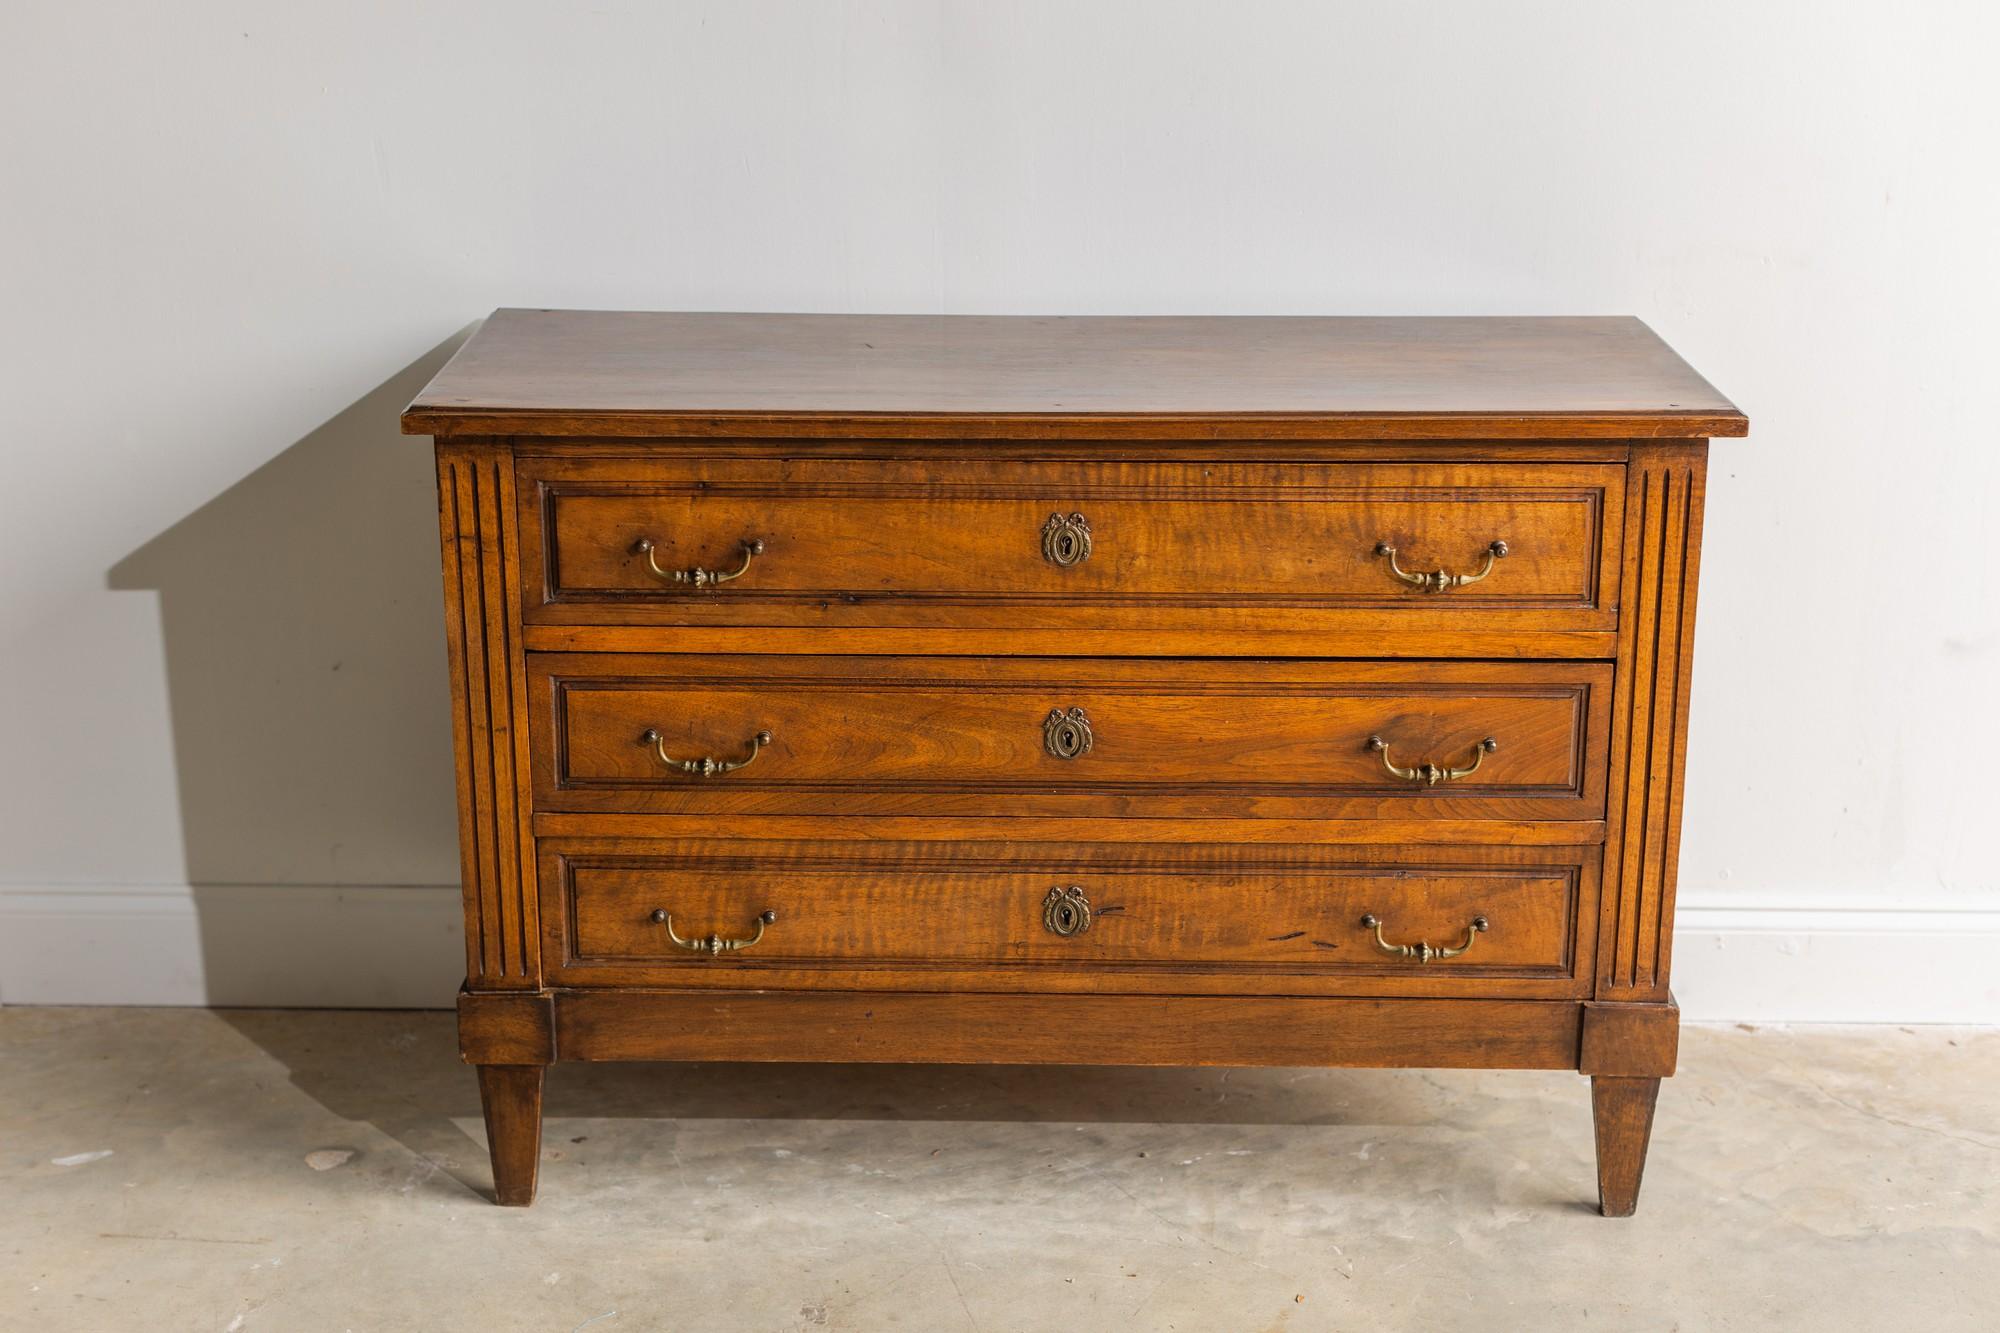 It doesn't get more classic than this Louis XVI chest of drawers. The wood species is unknown for this piece, but the dark stain gives this chest such a smooth and warm feel. There are 3 drawers with original drawer pulls and hardware.